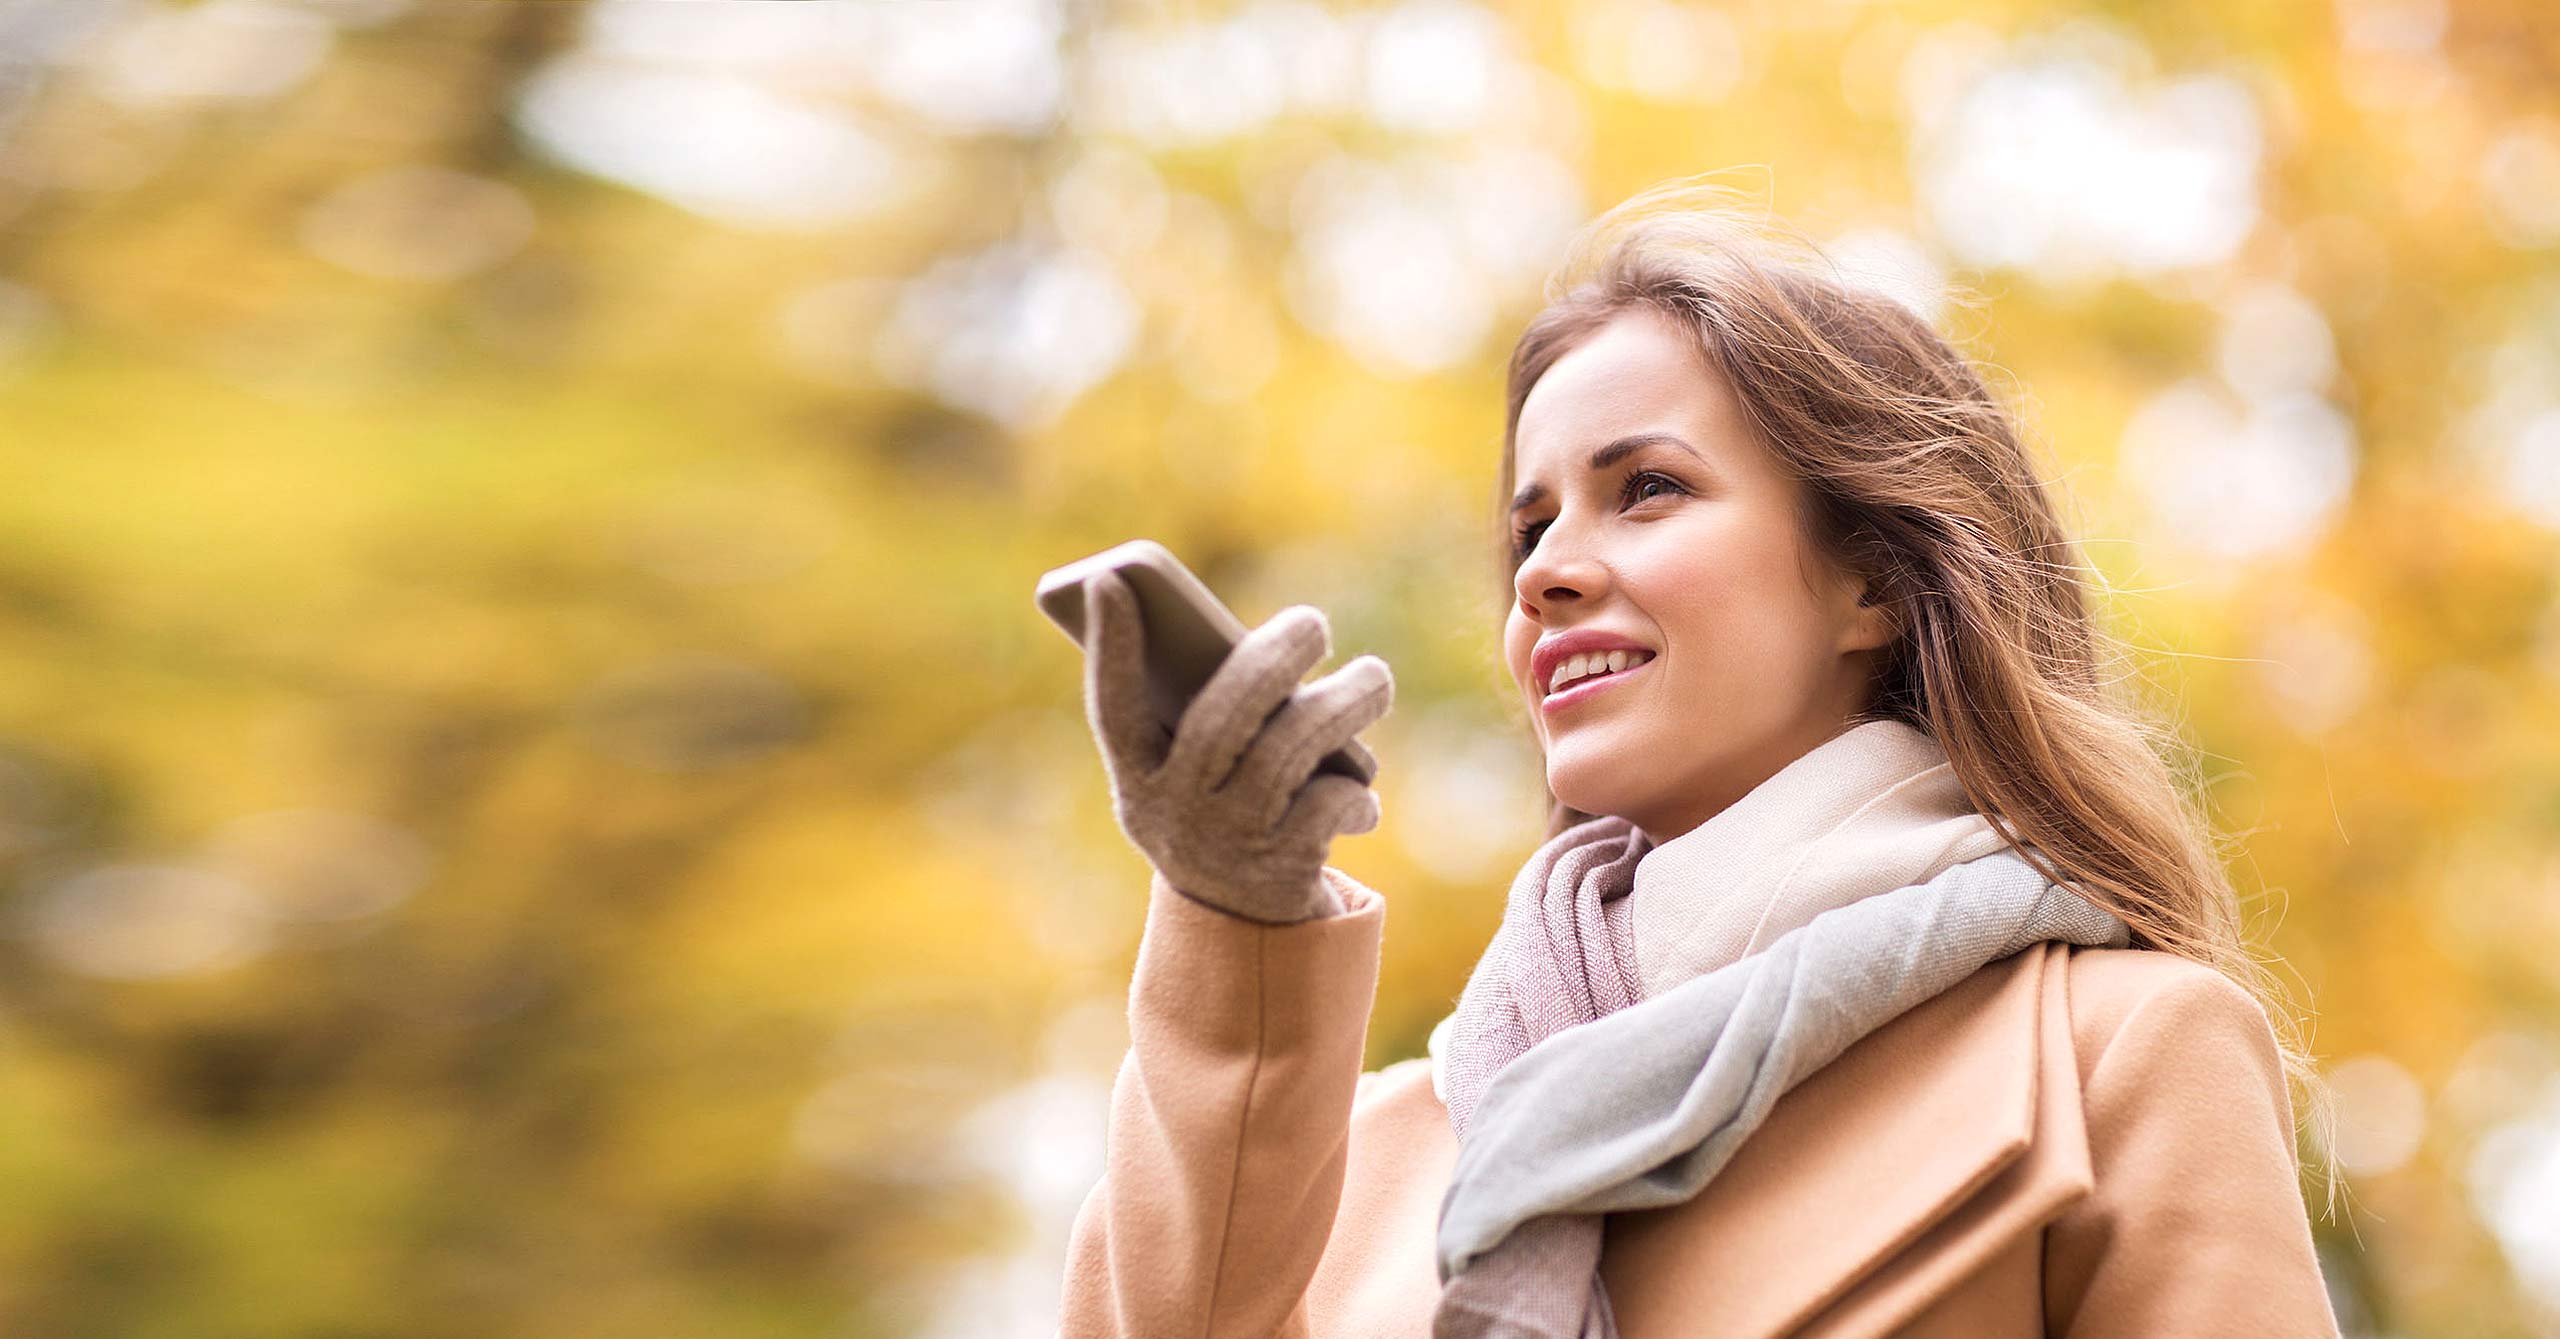 Woman recording voice on smartphone in autumn park